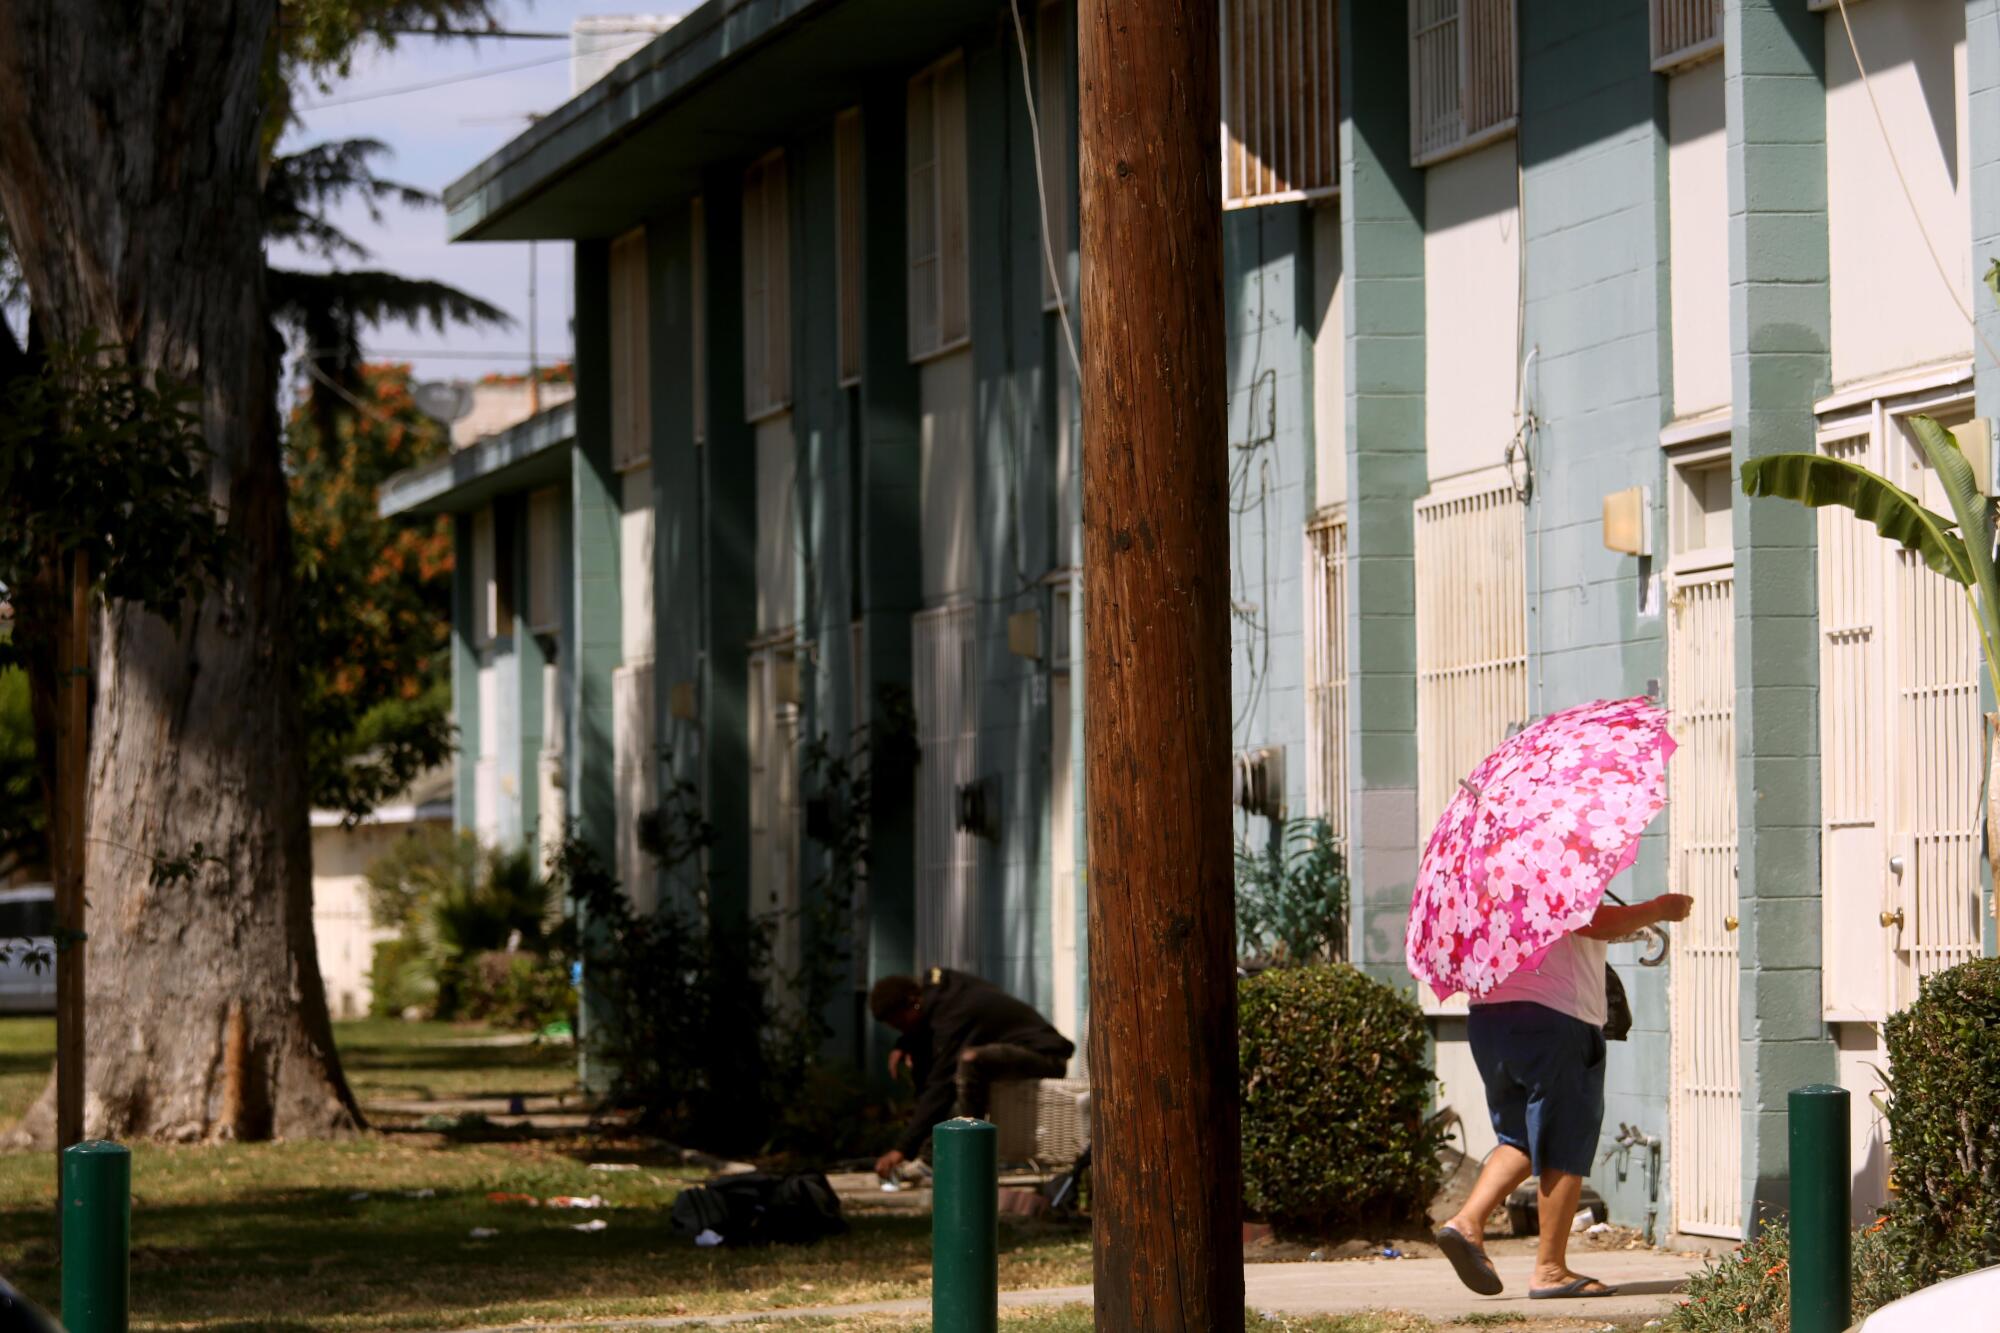 A woman with a pink umbrella walks to an apartment building.